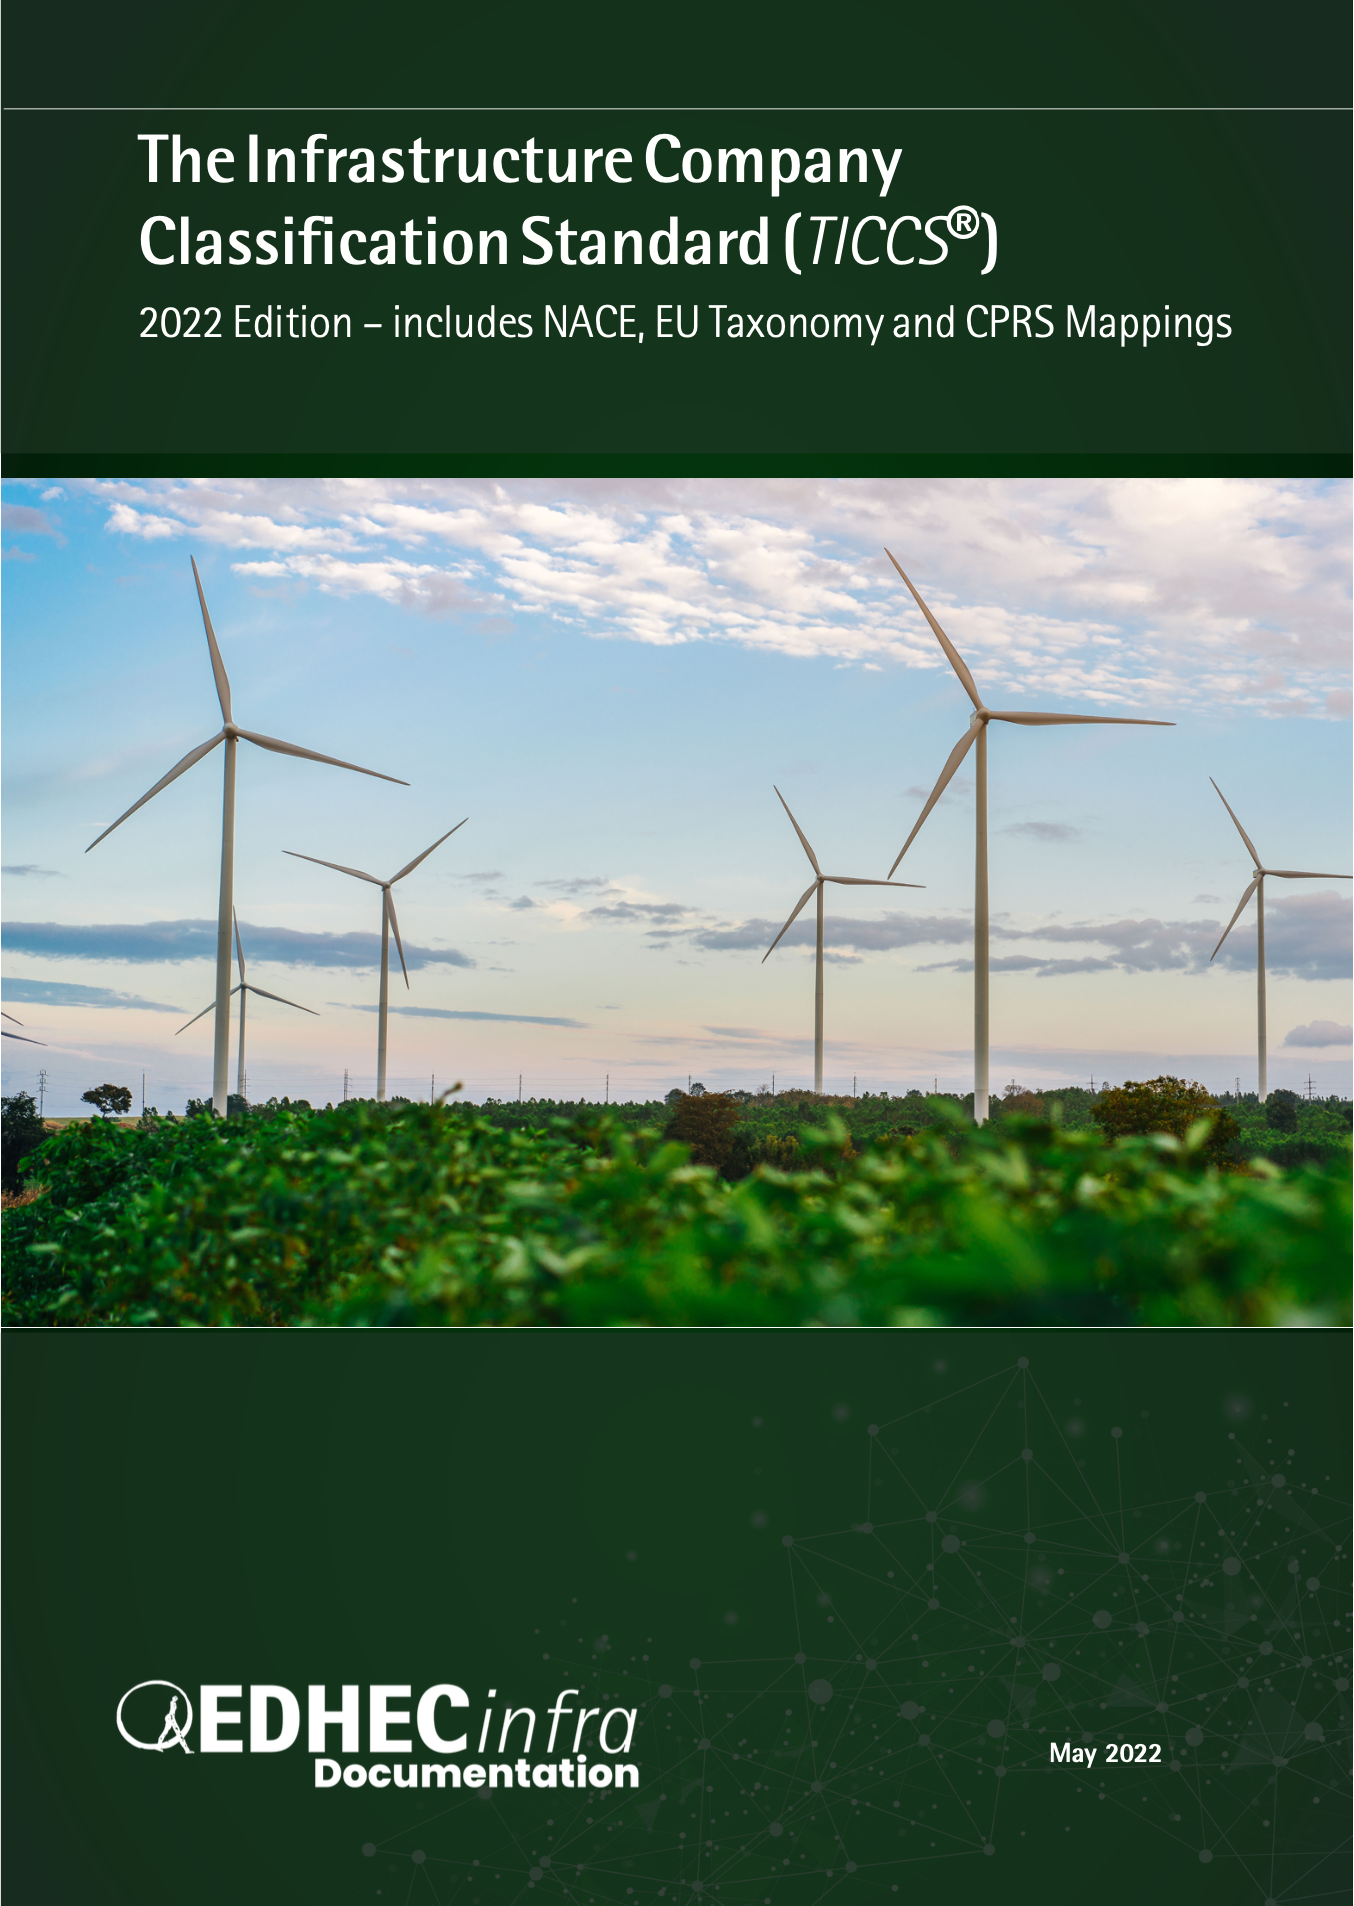 Featured image for “The 2022 edition of TICCS® now includes sustainability mappings and hydrogen assets”